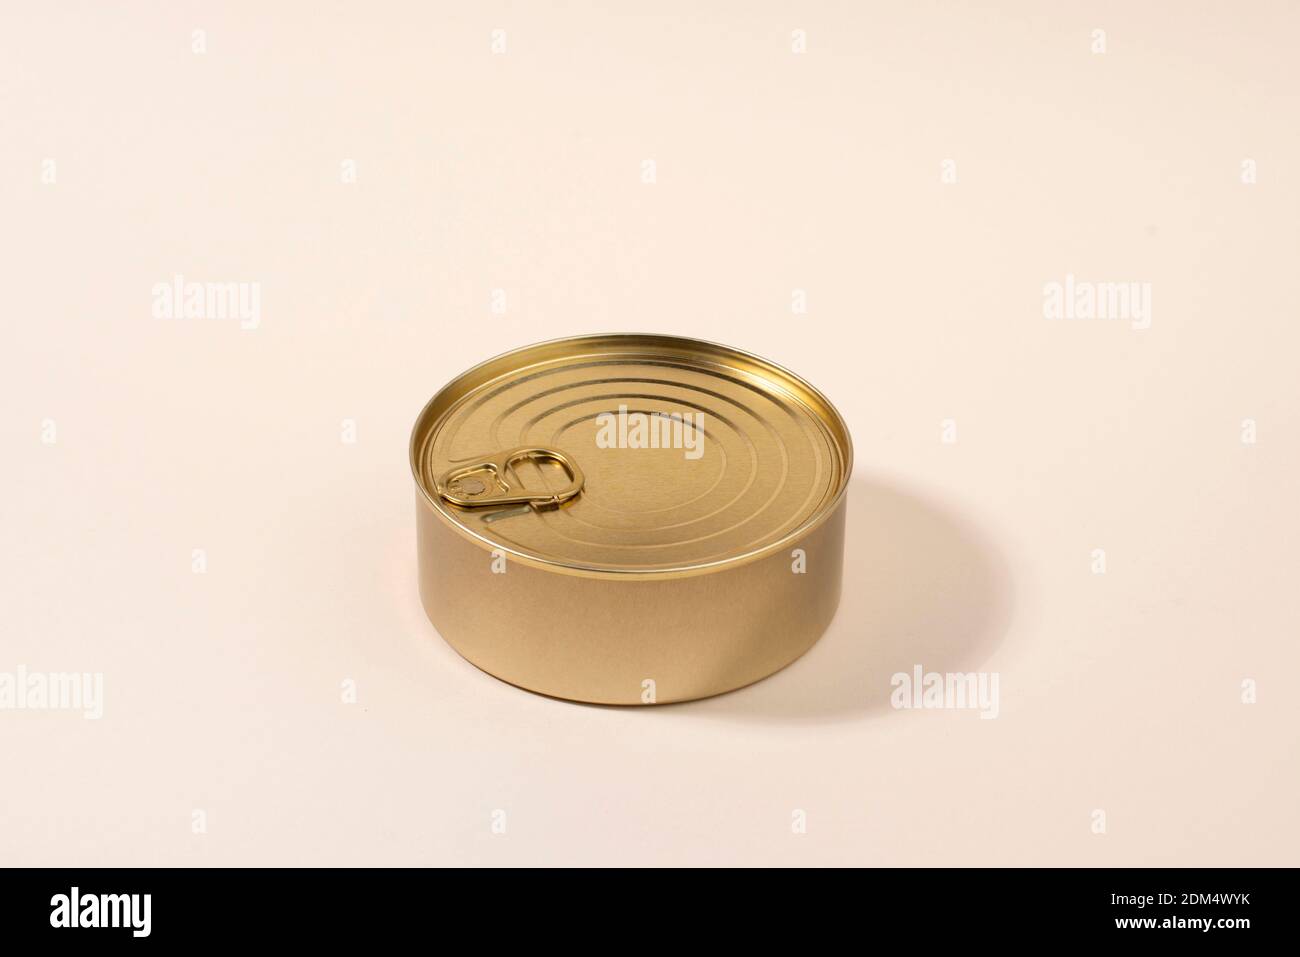 Gold unlabeled tin can on light background Stock Photo